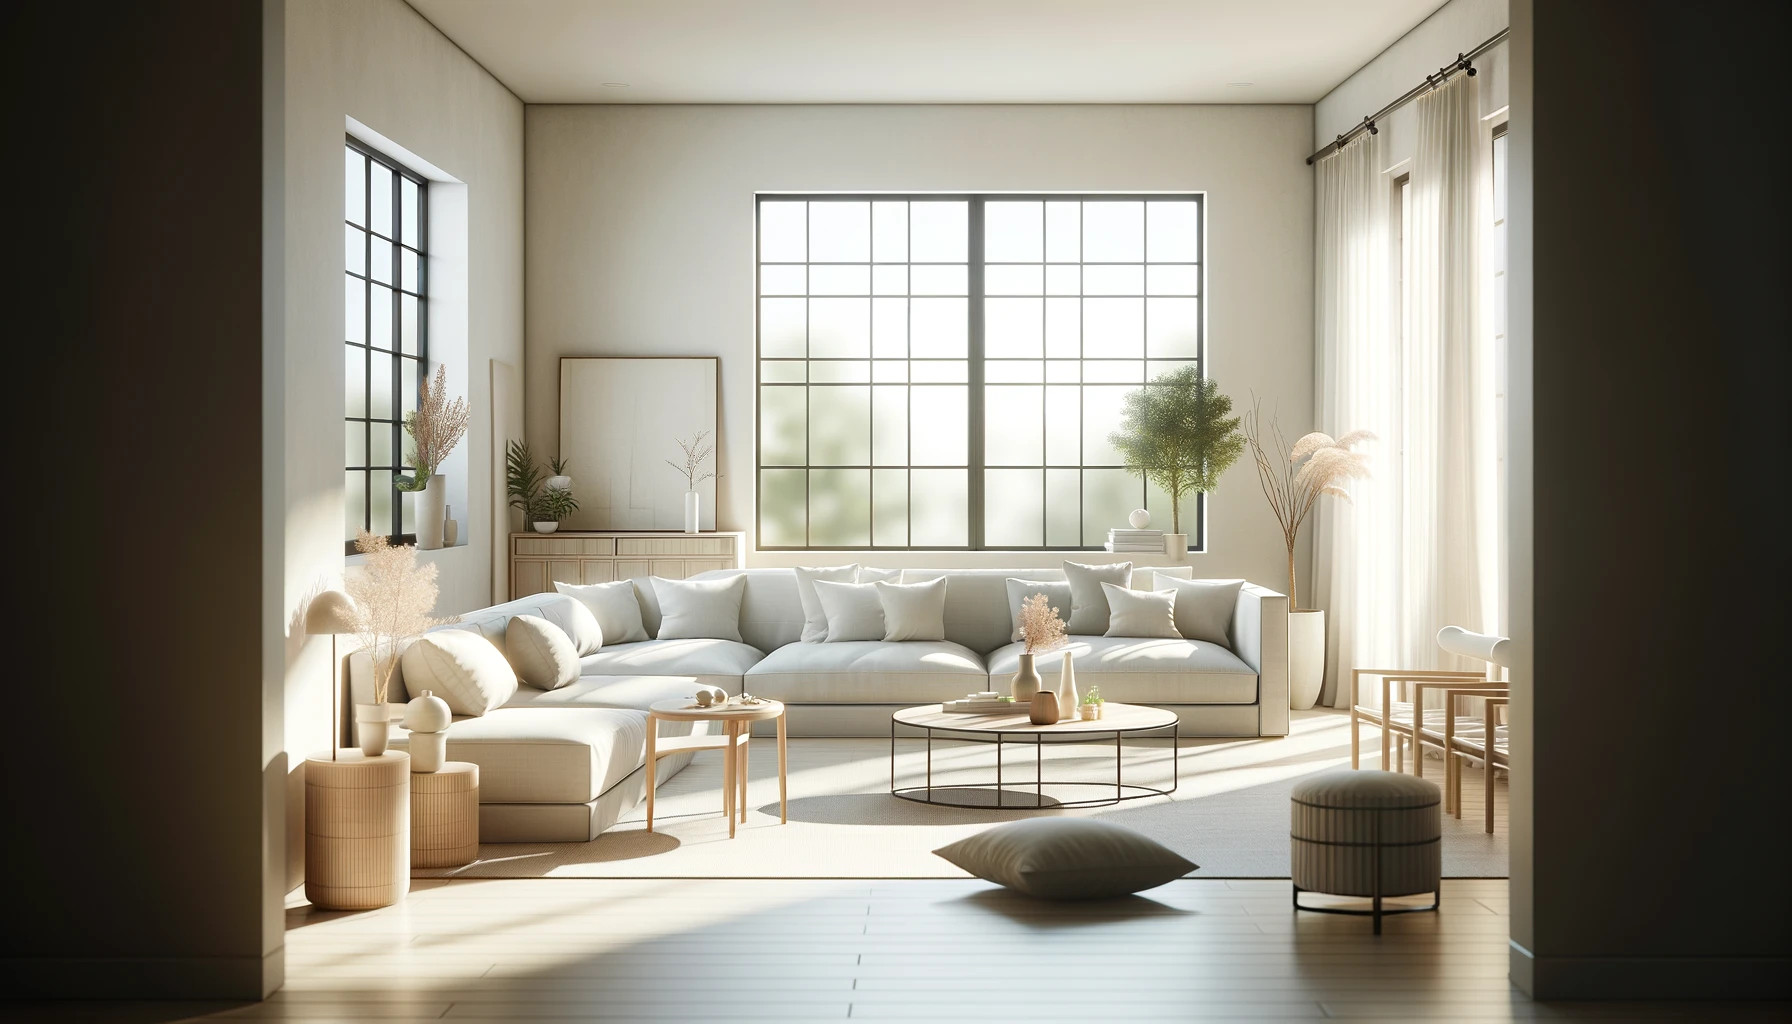 Minimalist living: Discover the serene beauty of minimalist living. Learn how simplifying your space and lifestyle can lead to greater happiness and fulfillment.